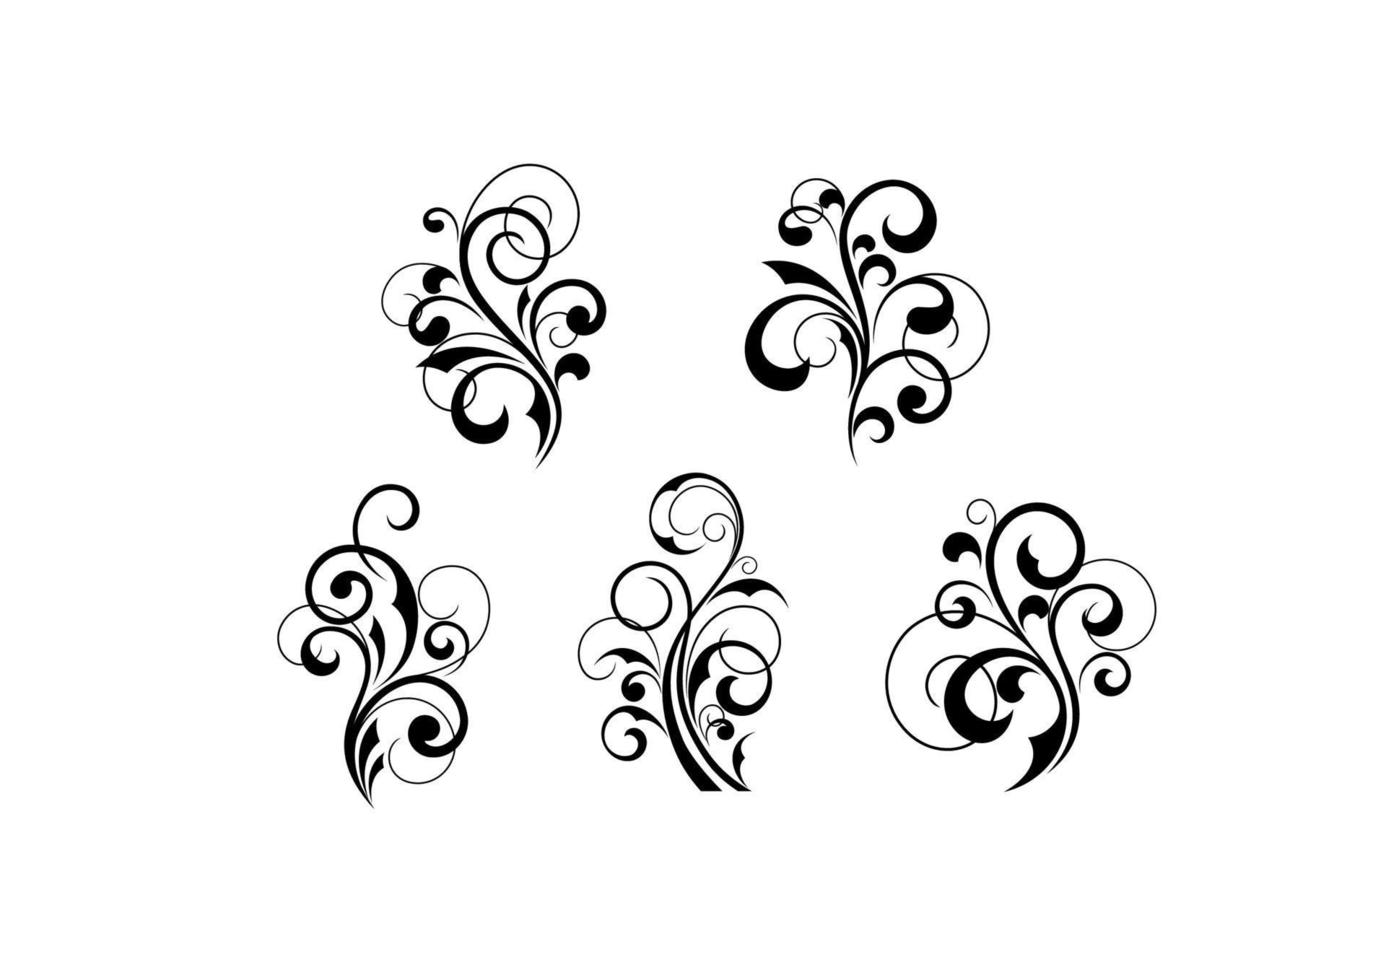 Floral elements and motifs vector